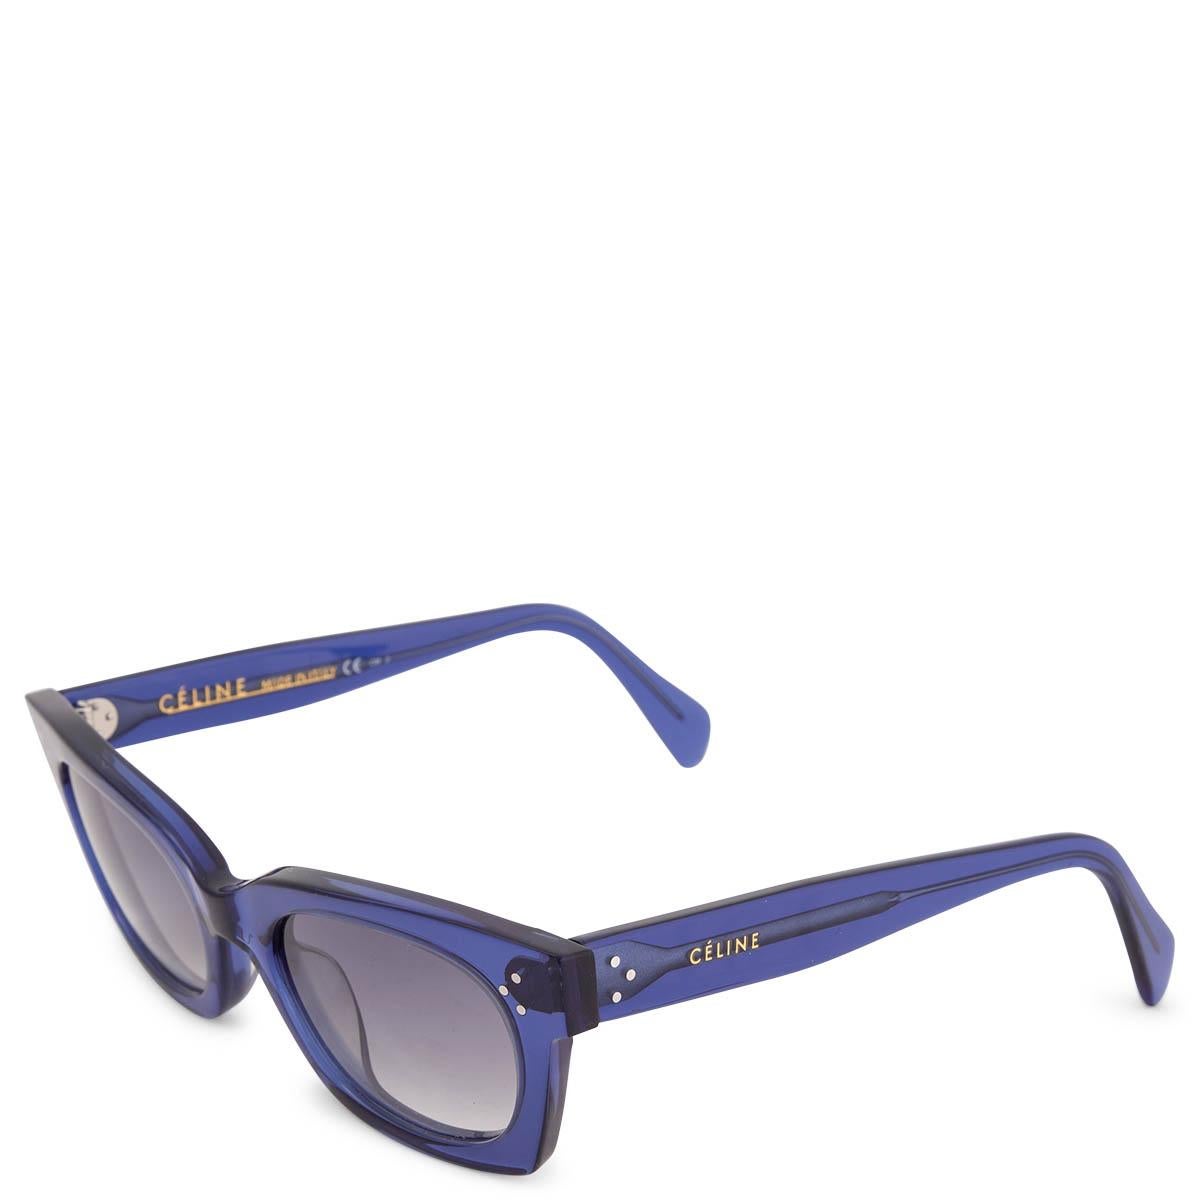 100% authentic Celine CL 41029/S Sofia sunglasses in midnight blue acetate with light black lenses. Embellished with gold-tone studs around the frame. Have been worn and have some barely visible scratches, otherwise in excellent condition. Come with